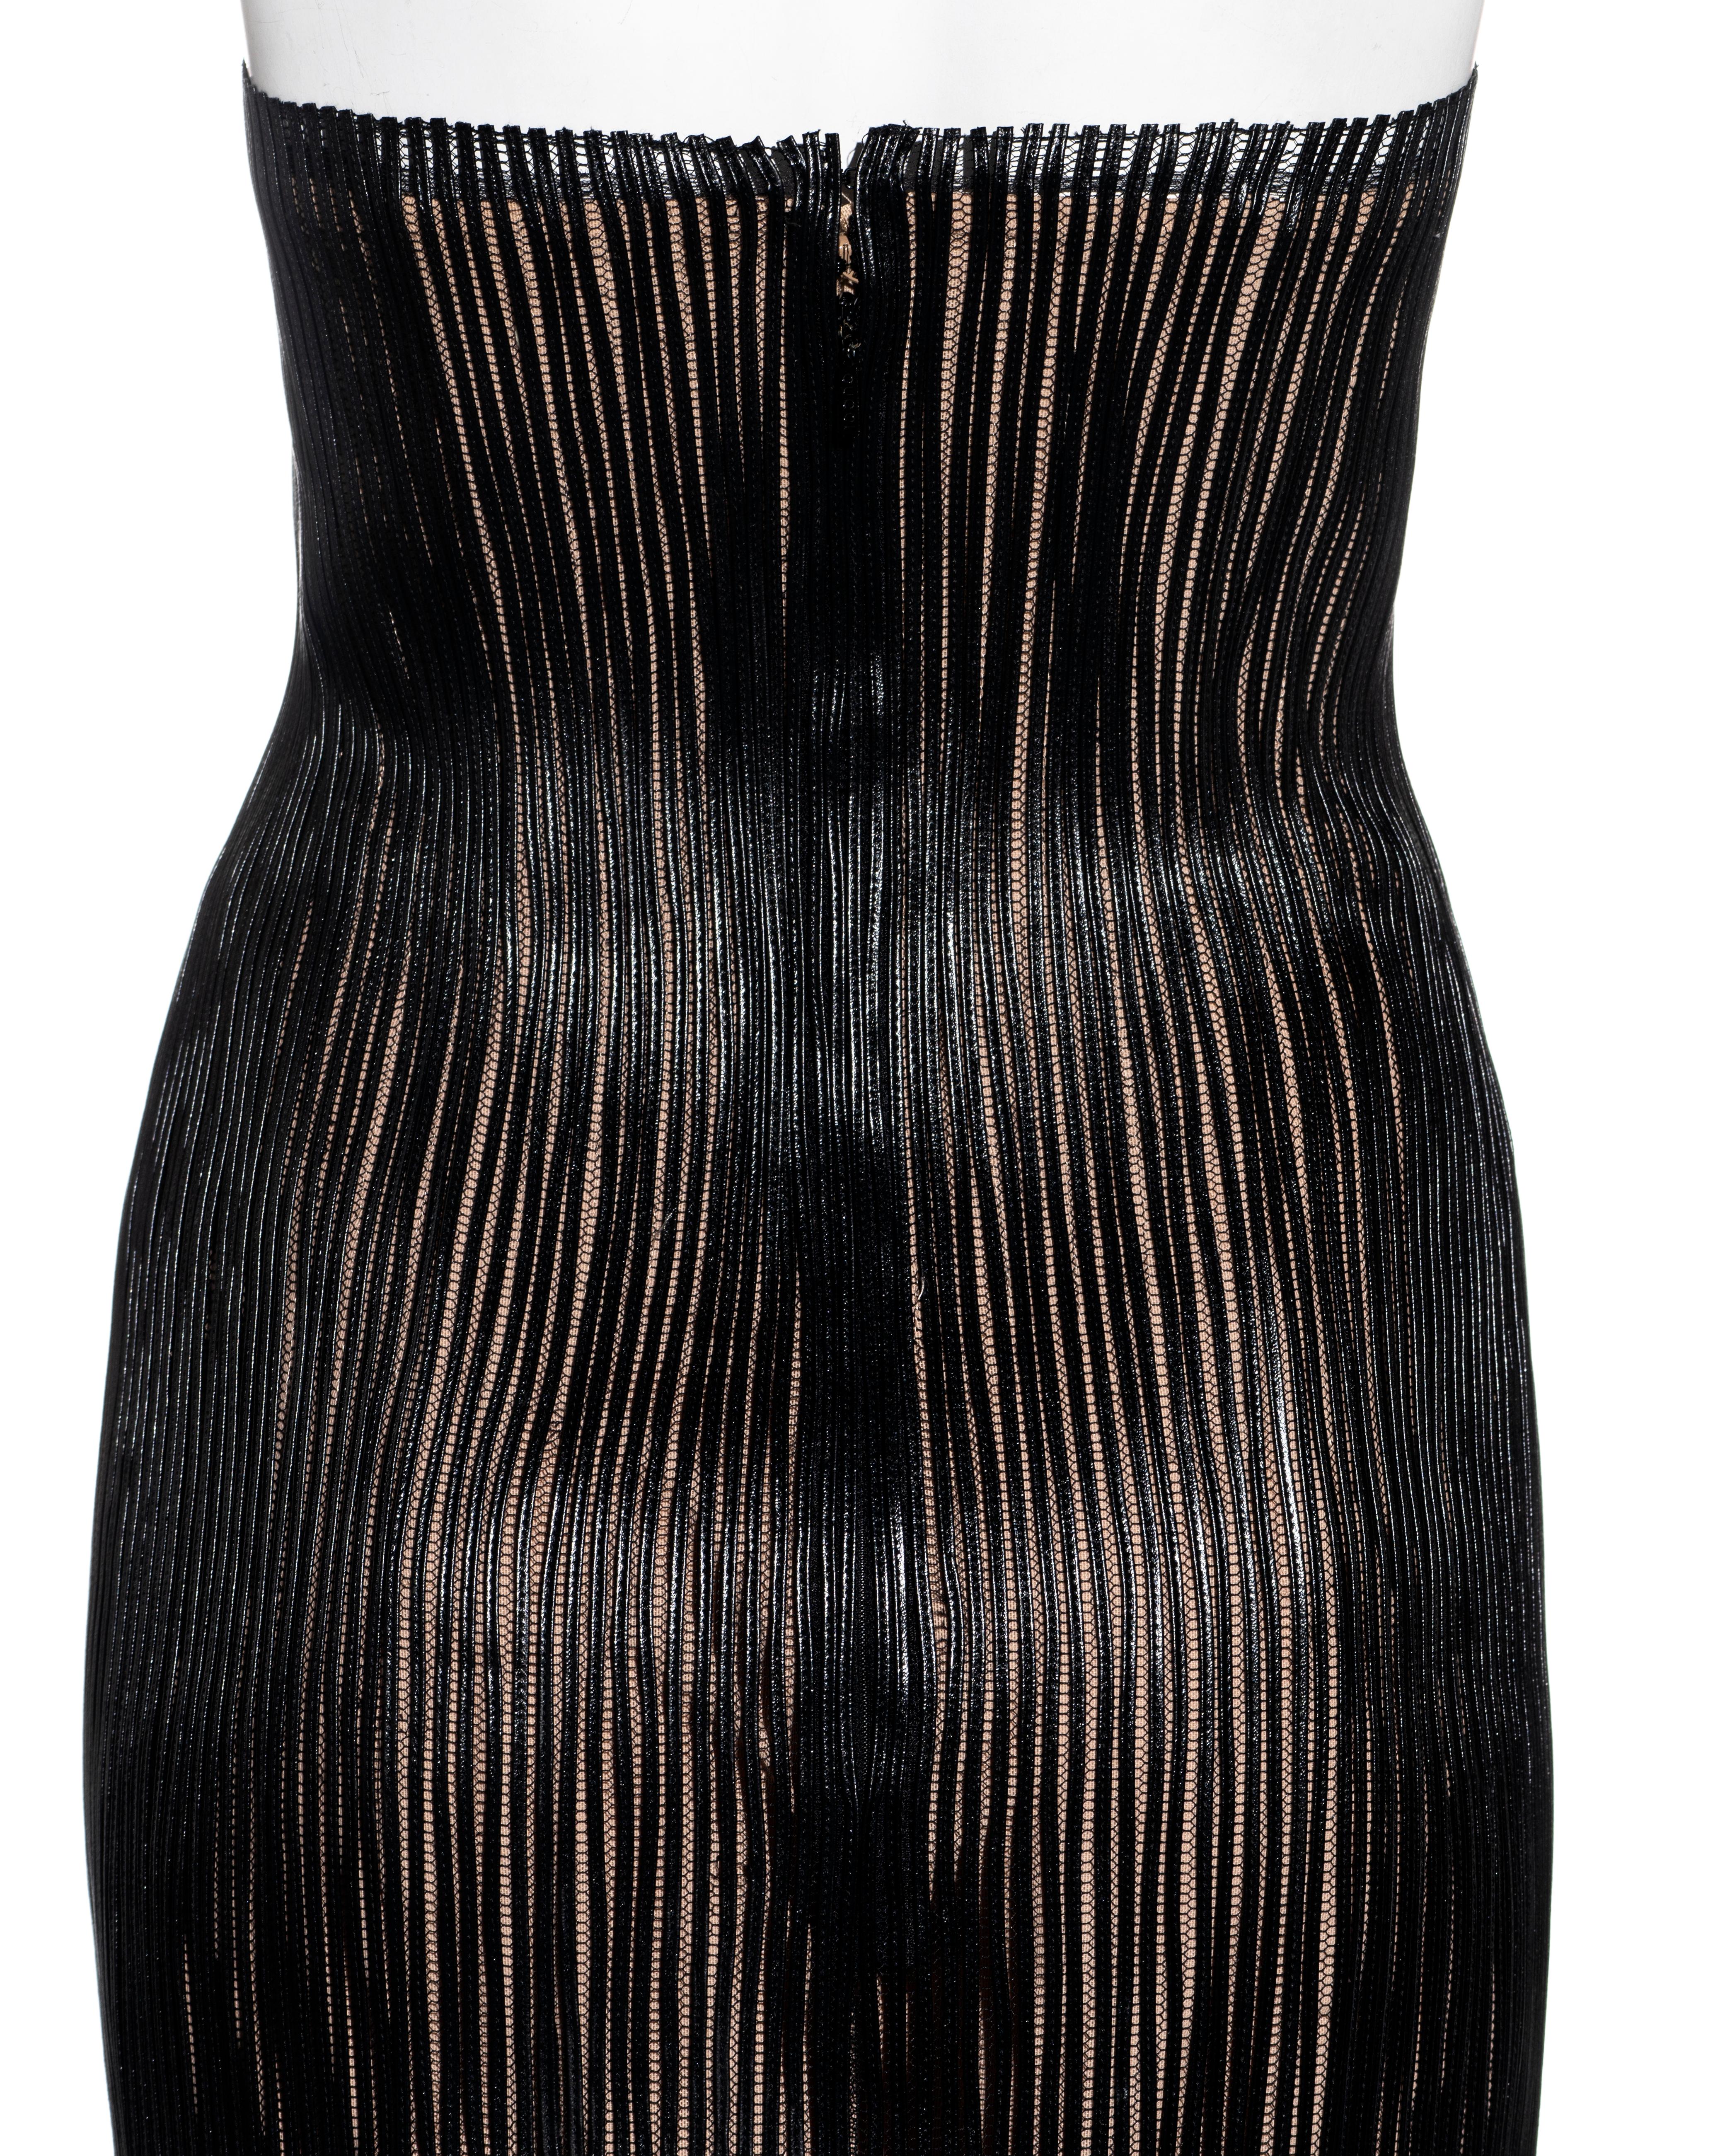 Gucci by Tom Ford black leather strapless corset dress, ss 2001 For Sale 2